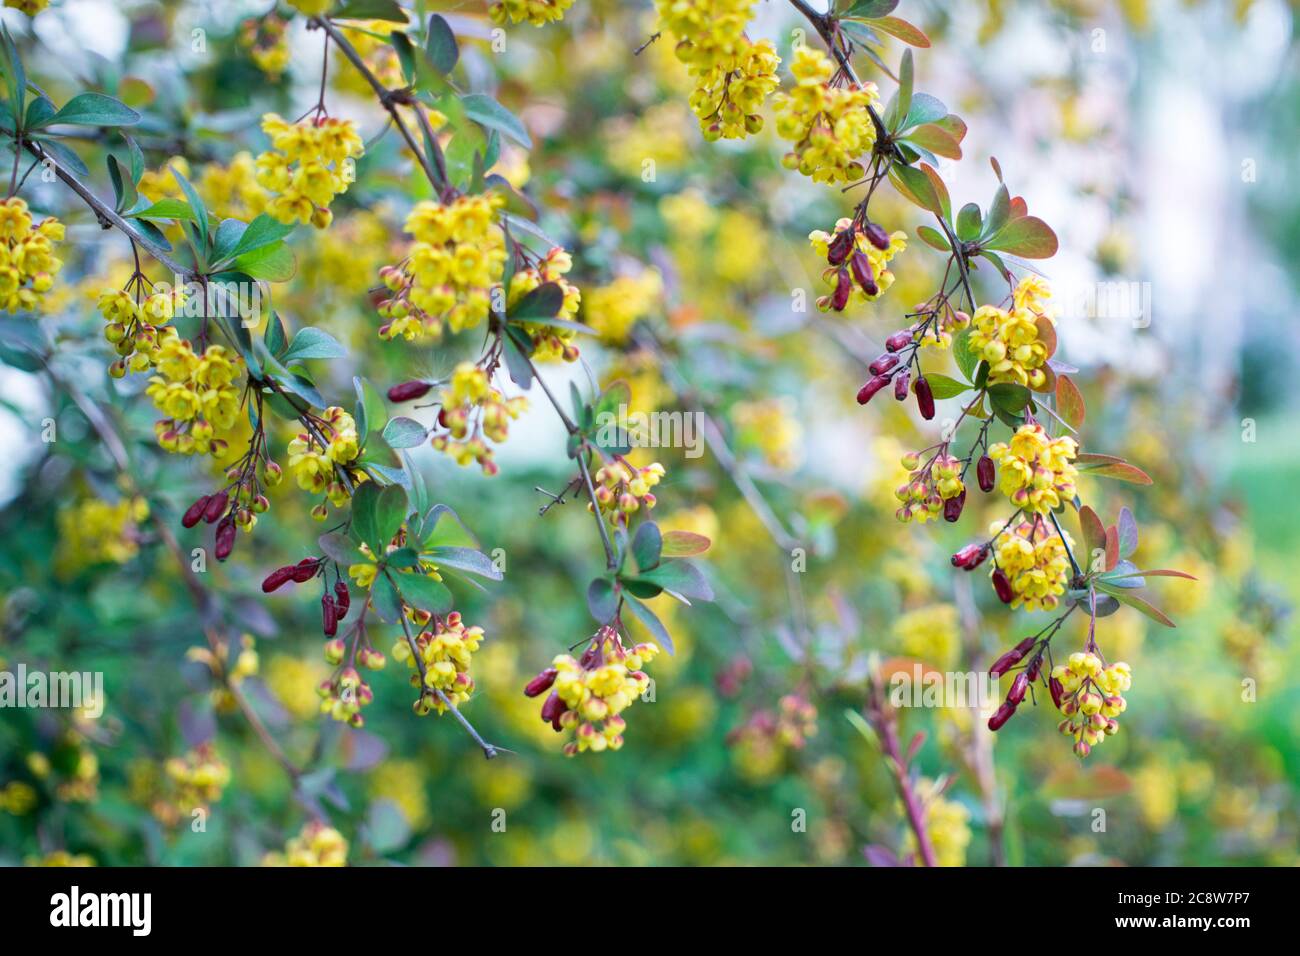 Flowering Thunberg's barberry or Berberis thunbergii. Cultivar with red leaves and yellow flowers Stock Photo